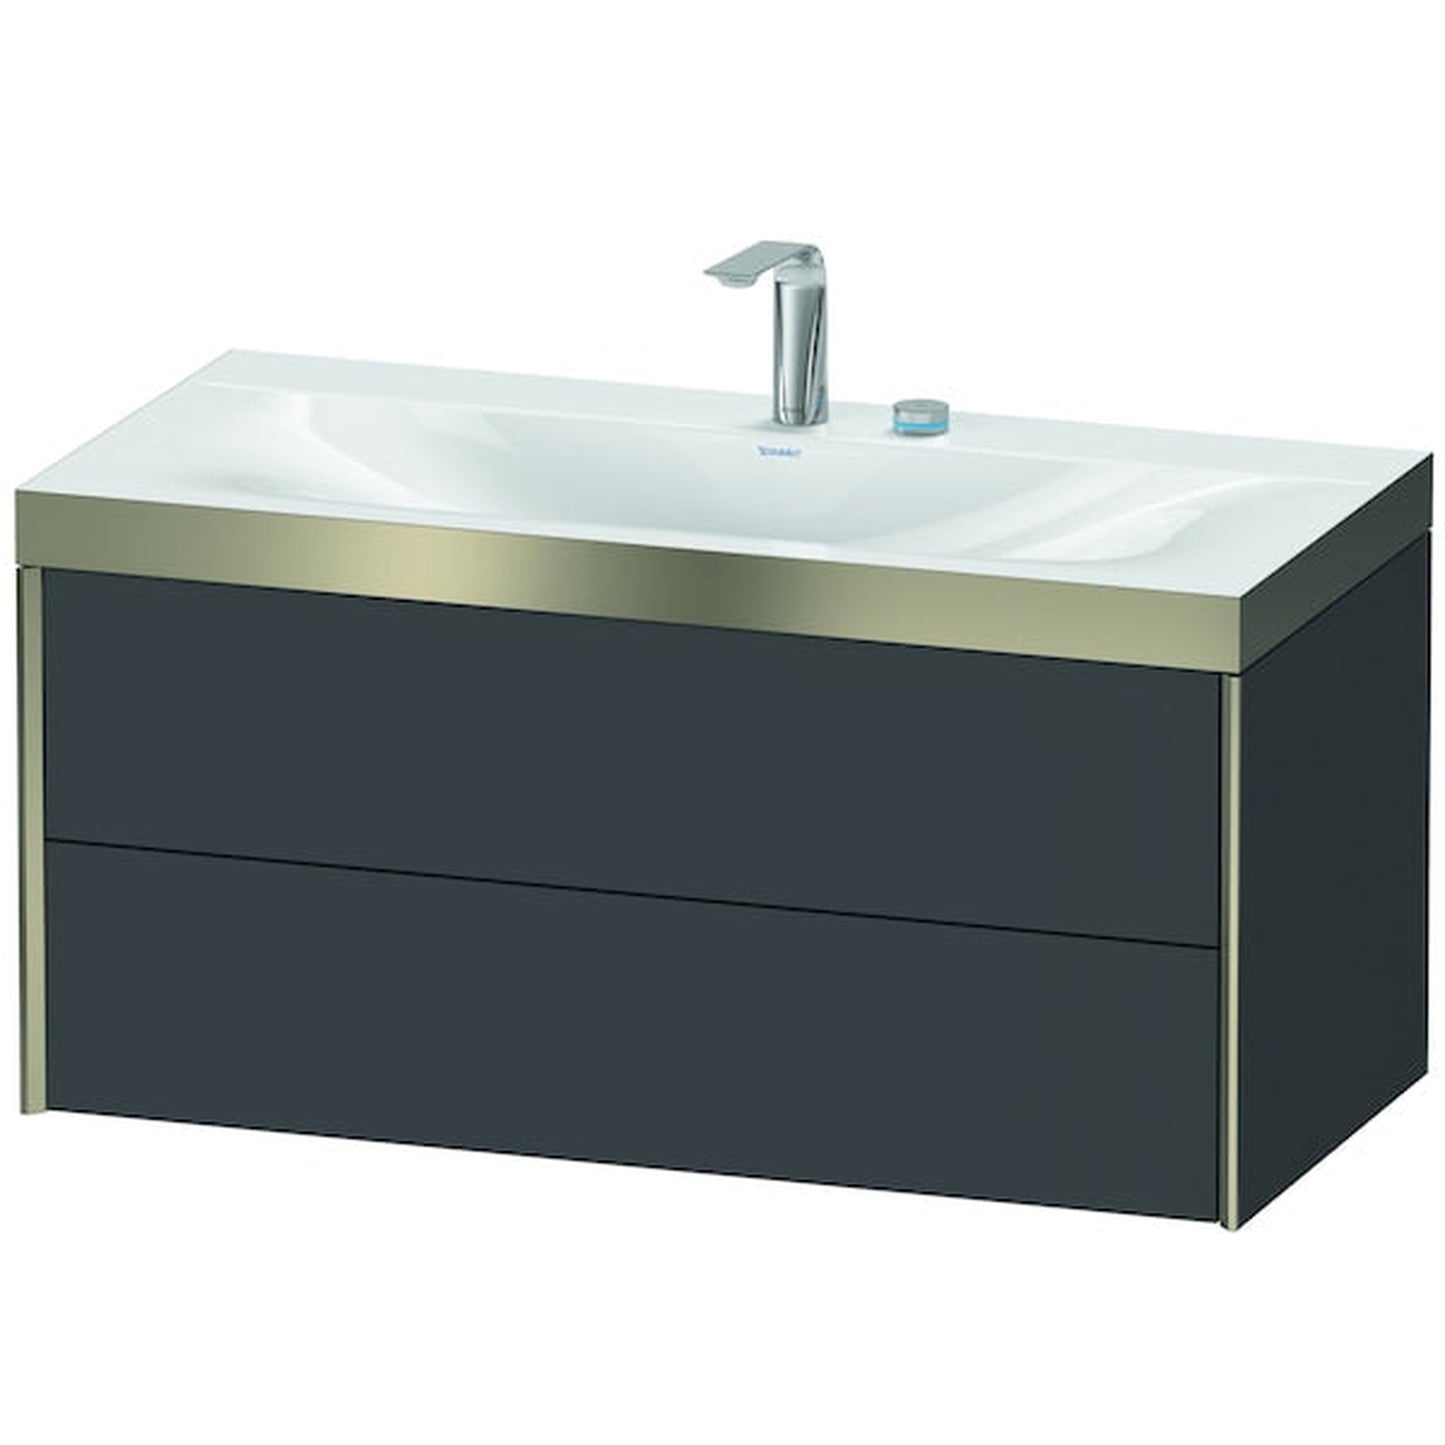 Duravit Xviu 39" x 20" x 19" Two Drawer C-Bonded Wall-Mount Vanity Kit With Two Tap Holes, Graphite (XV4616EB149P)